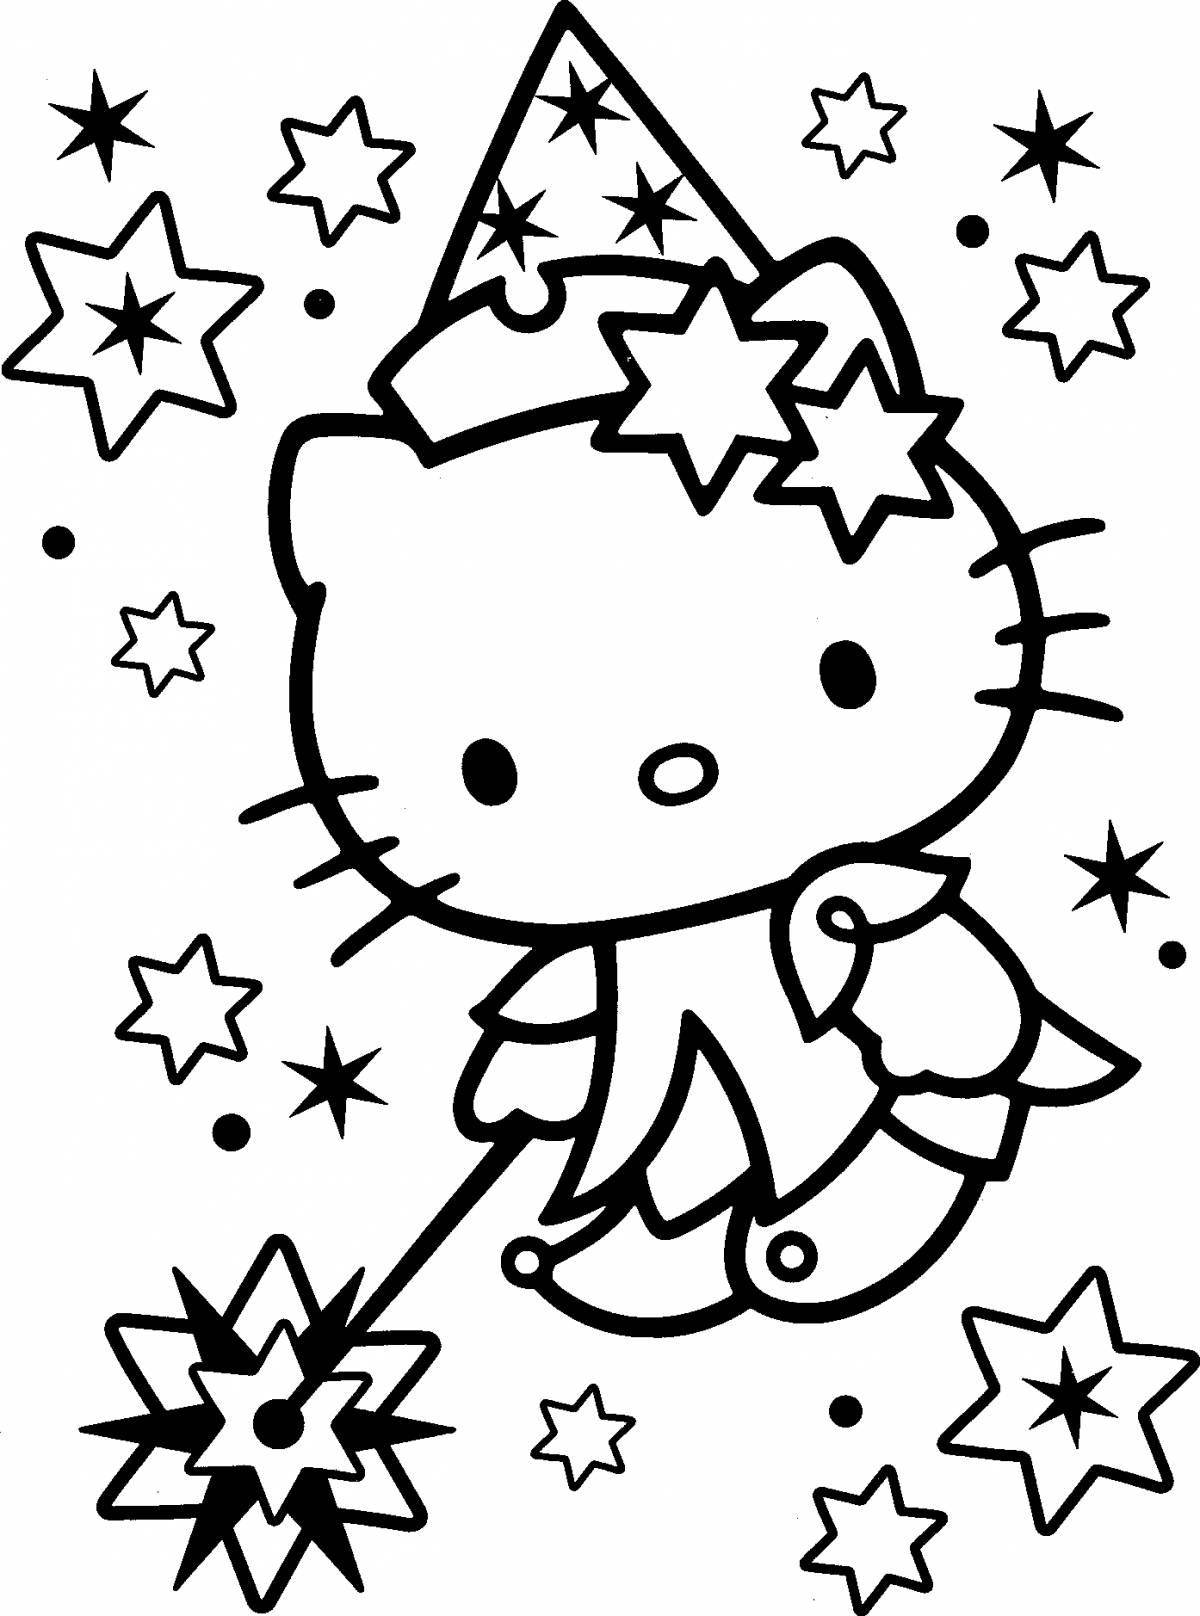 Ecstatic kitty new year coloring page